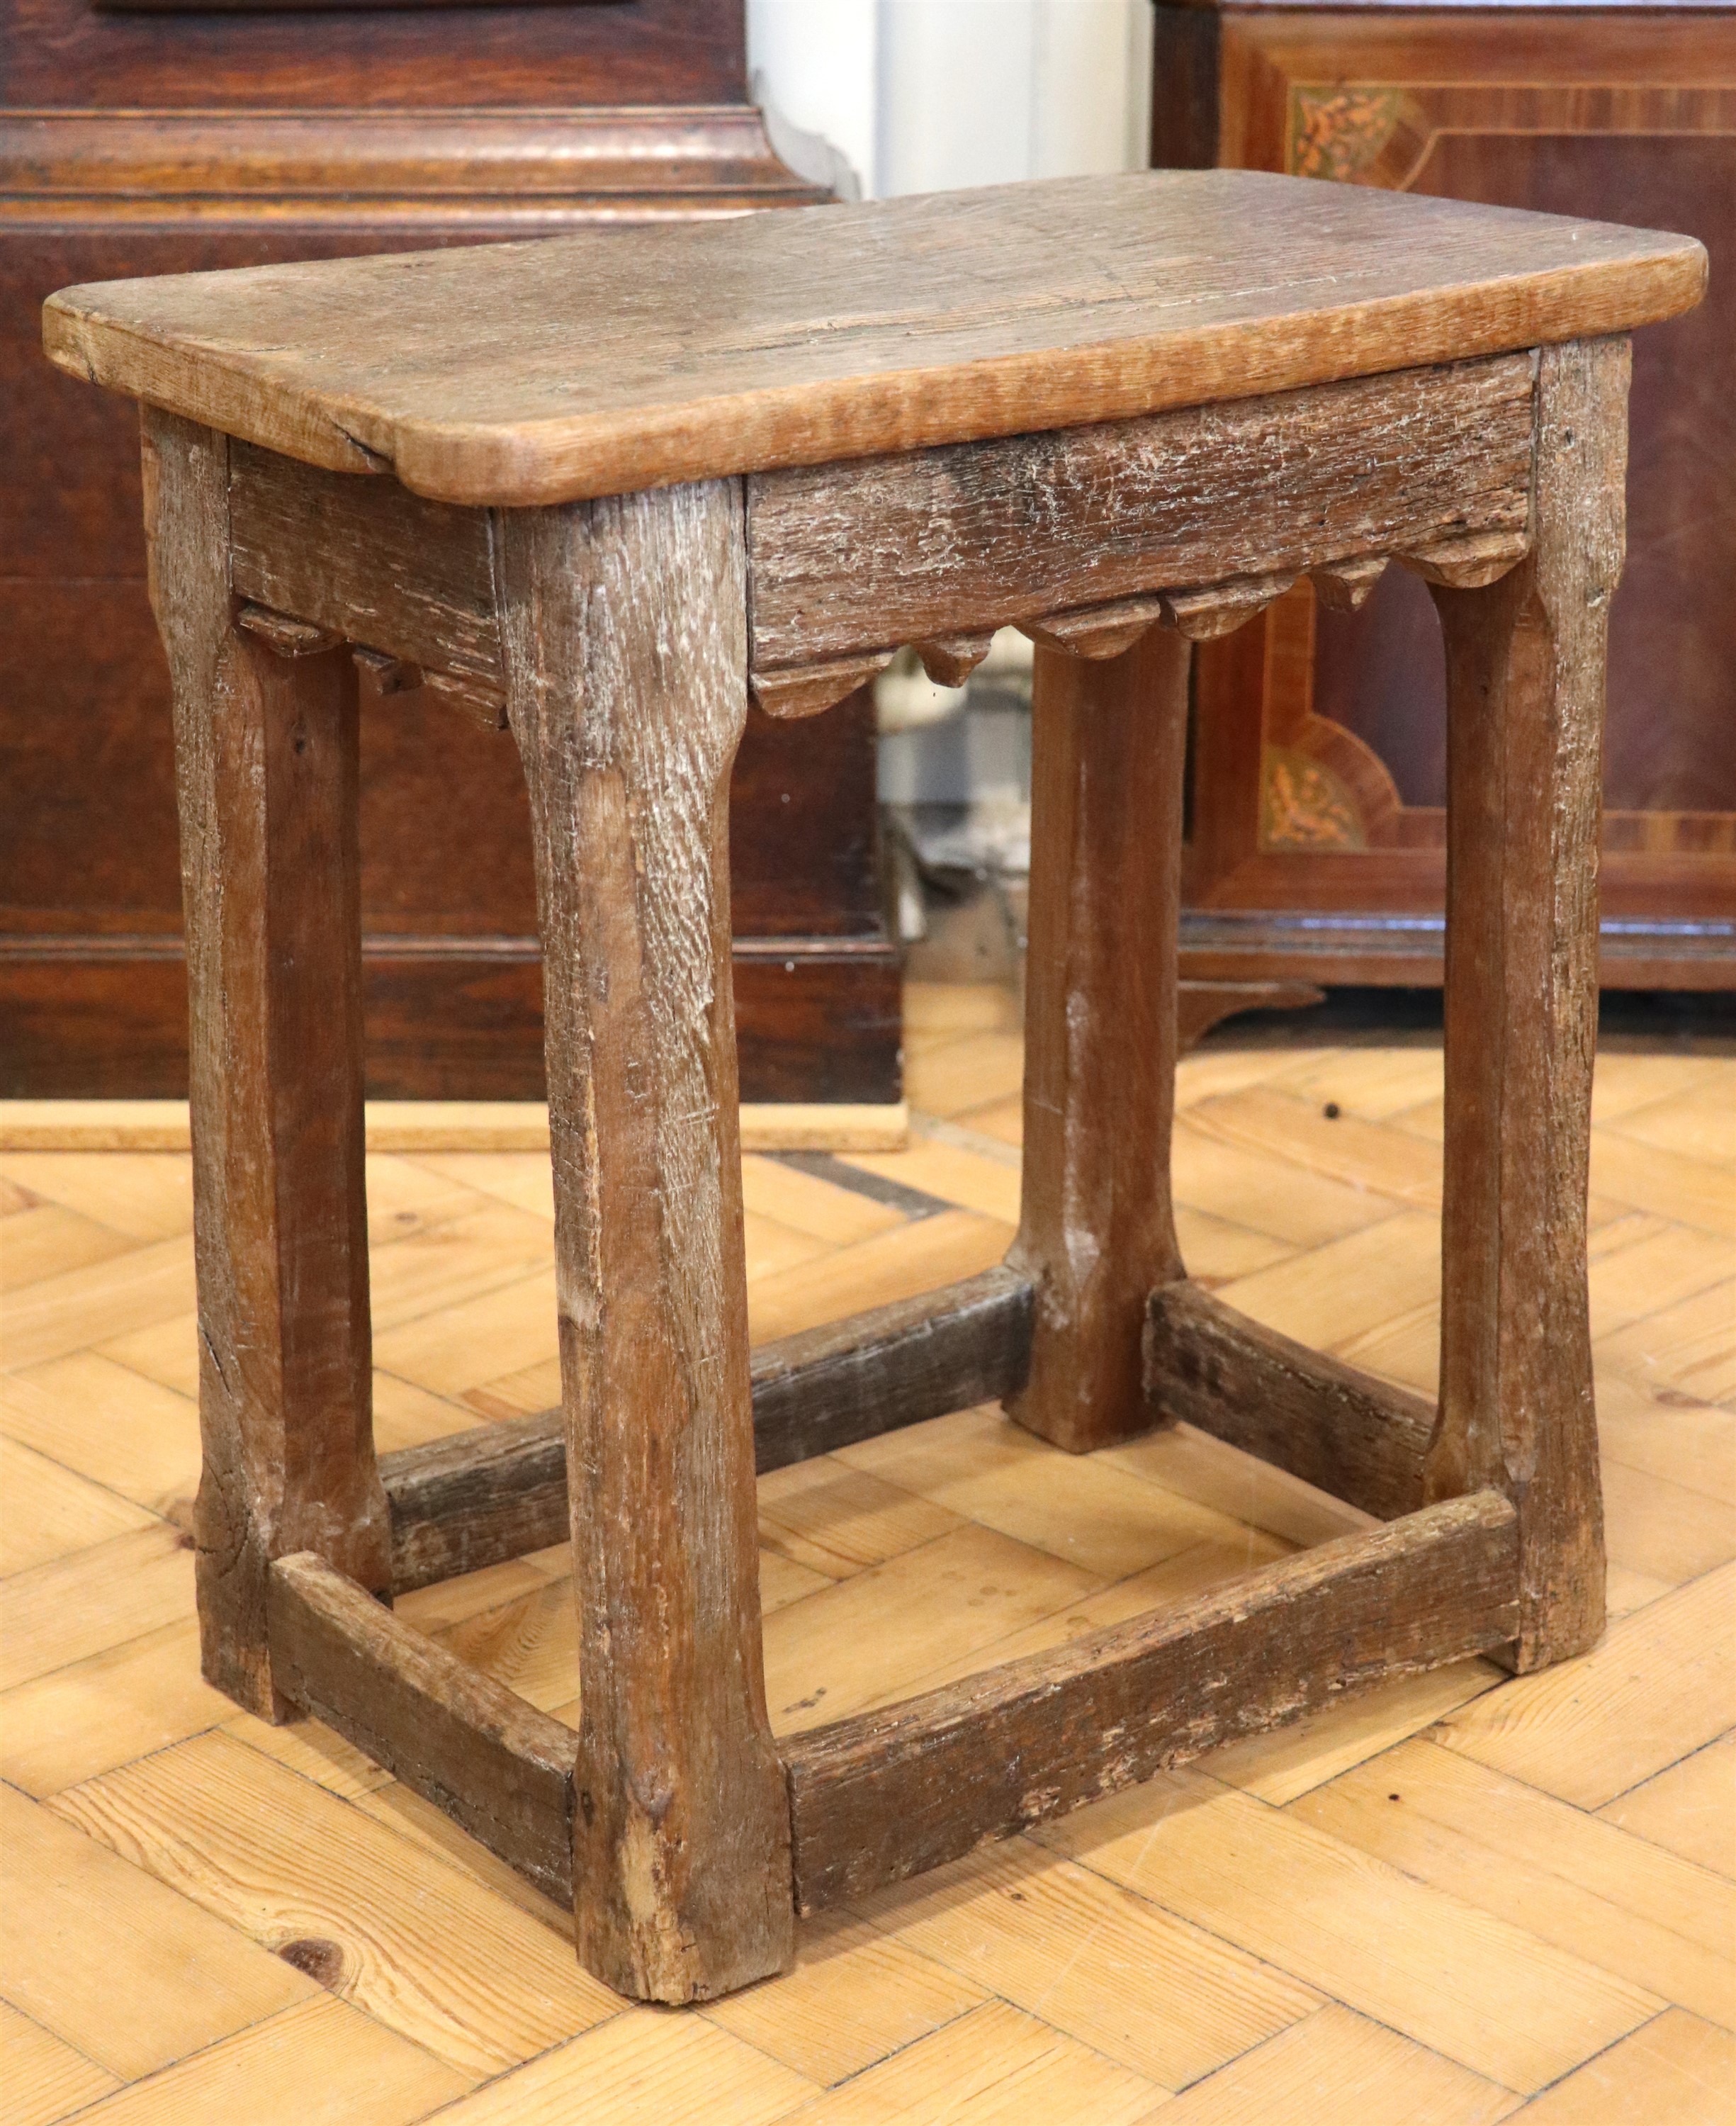 An oak joint stool, 17th Century and later, 48 x 27 x 48 cm - Image 2 of 2